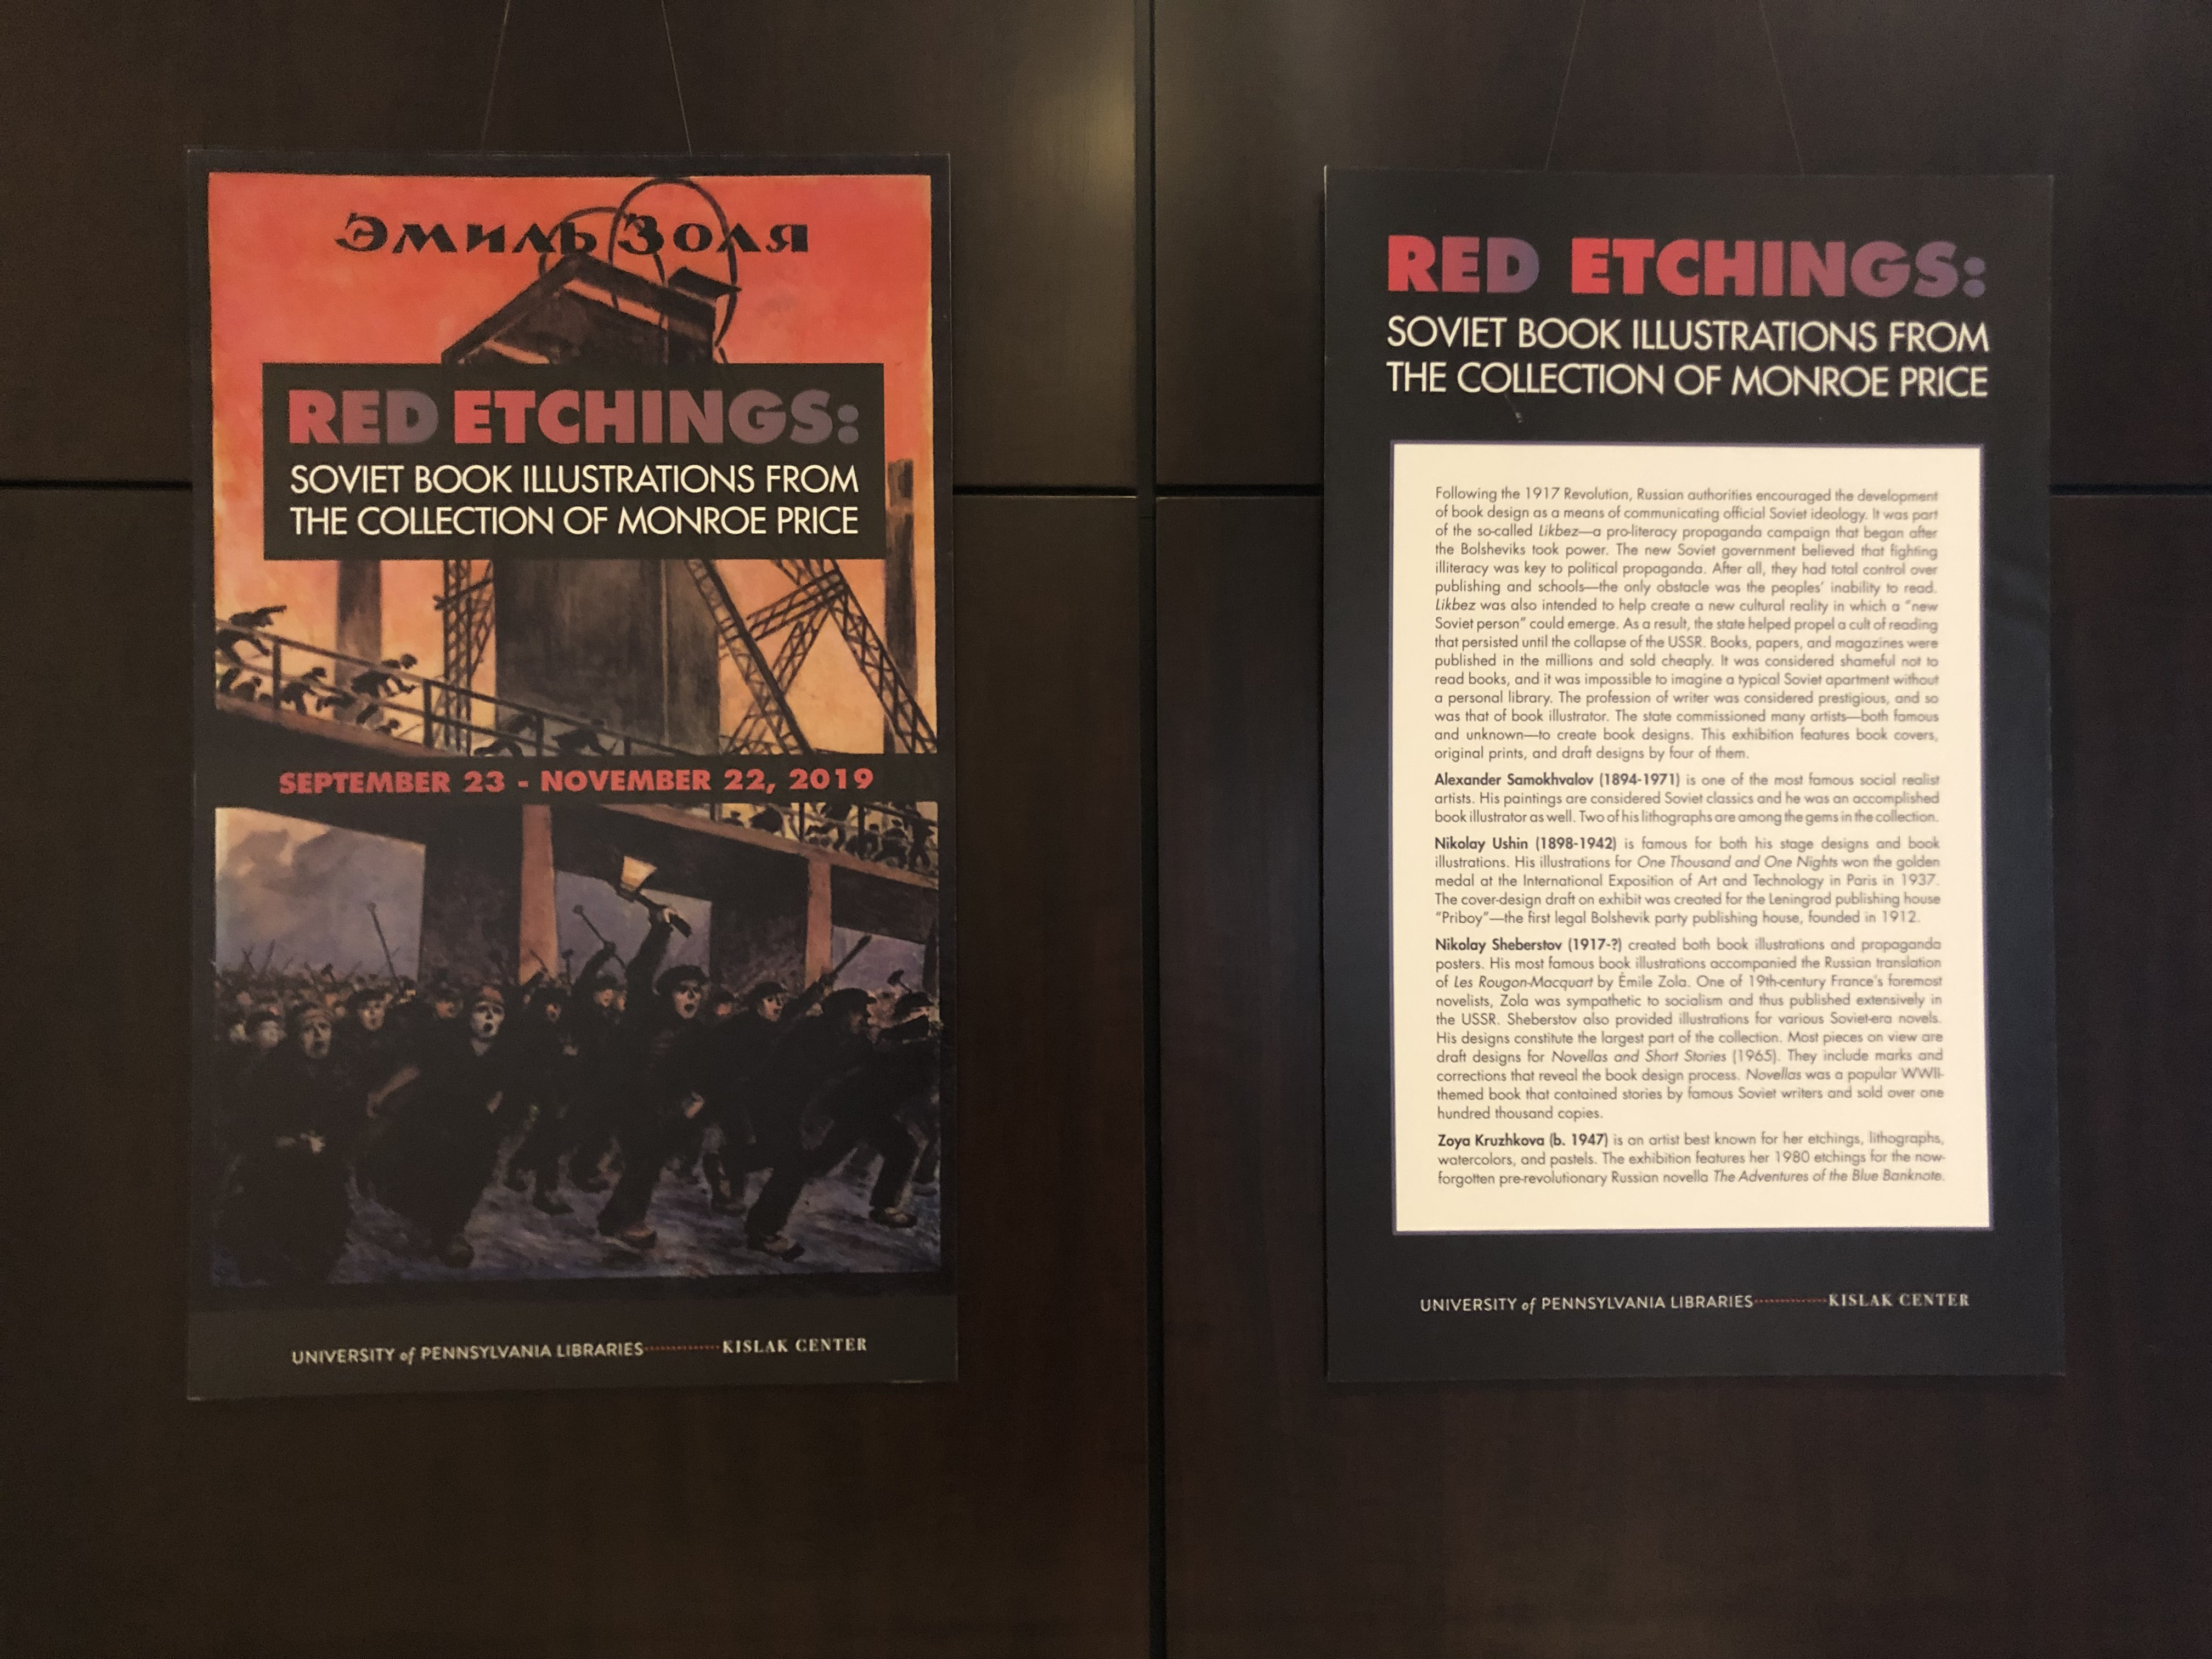 Red Etchings poster and introduction